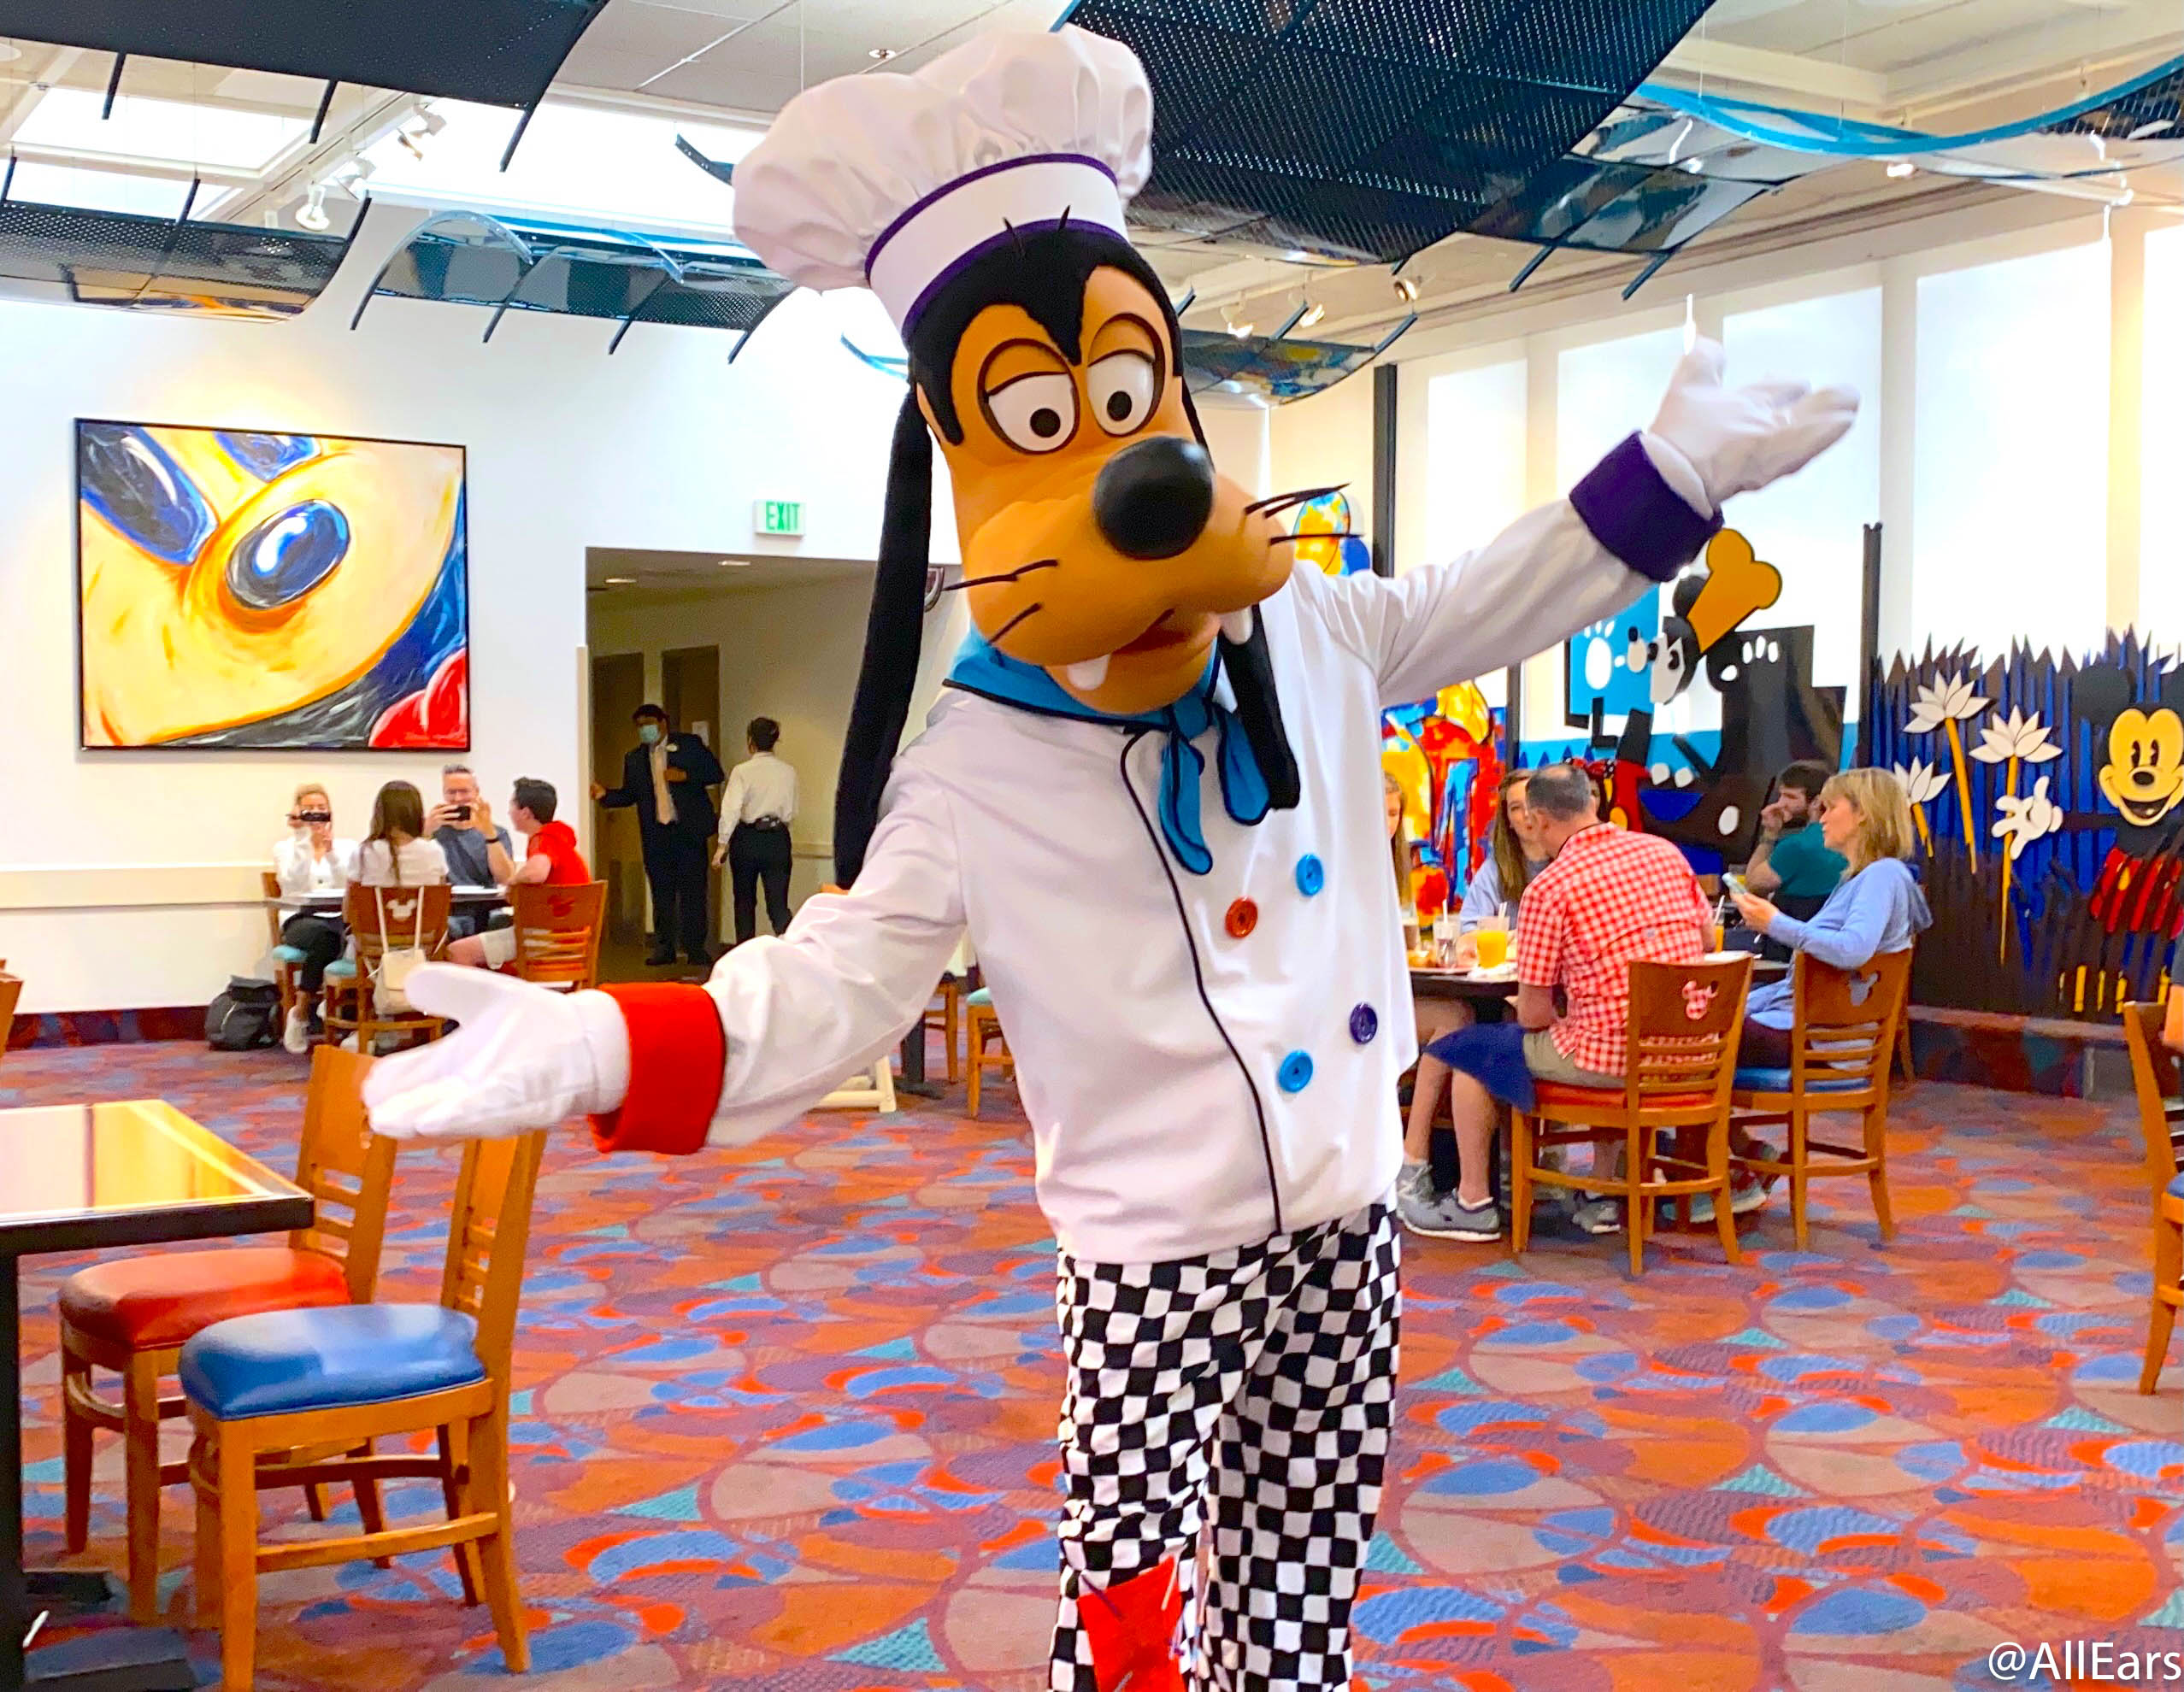 PHOTOS & VIDEO: Traditional Character Dining is BACK at Chef Mickey's in Disney World - AllEars.Net